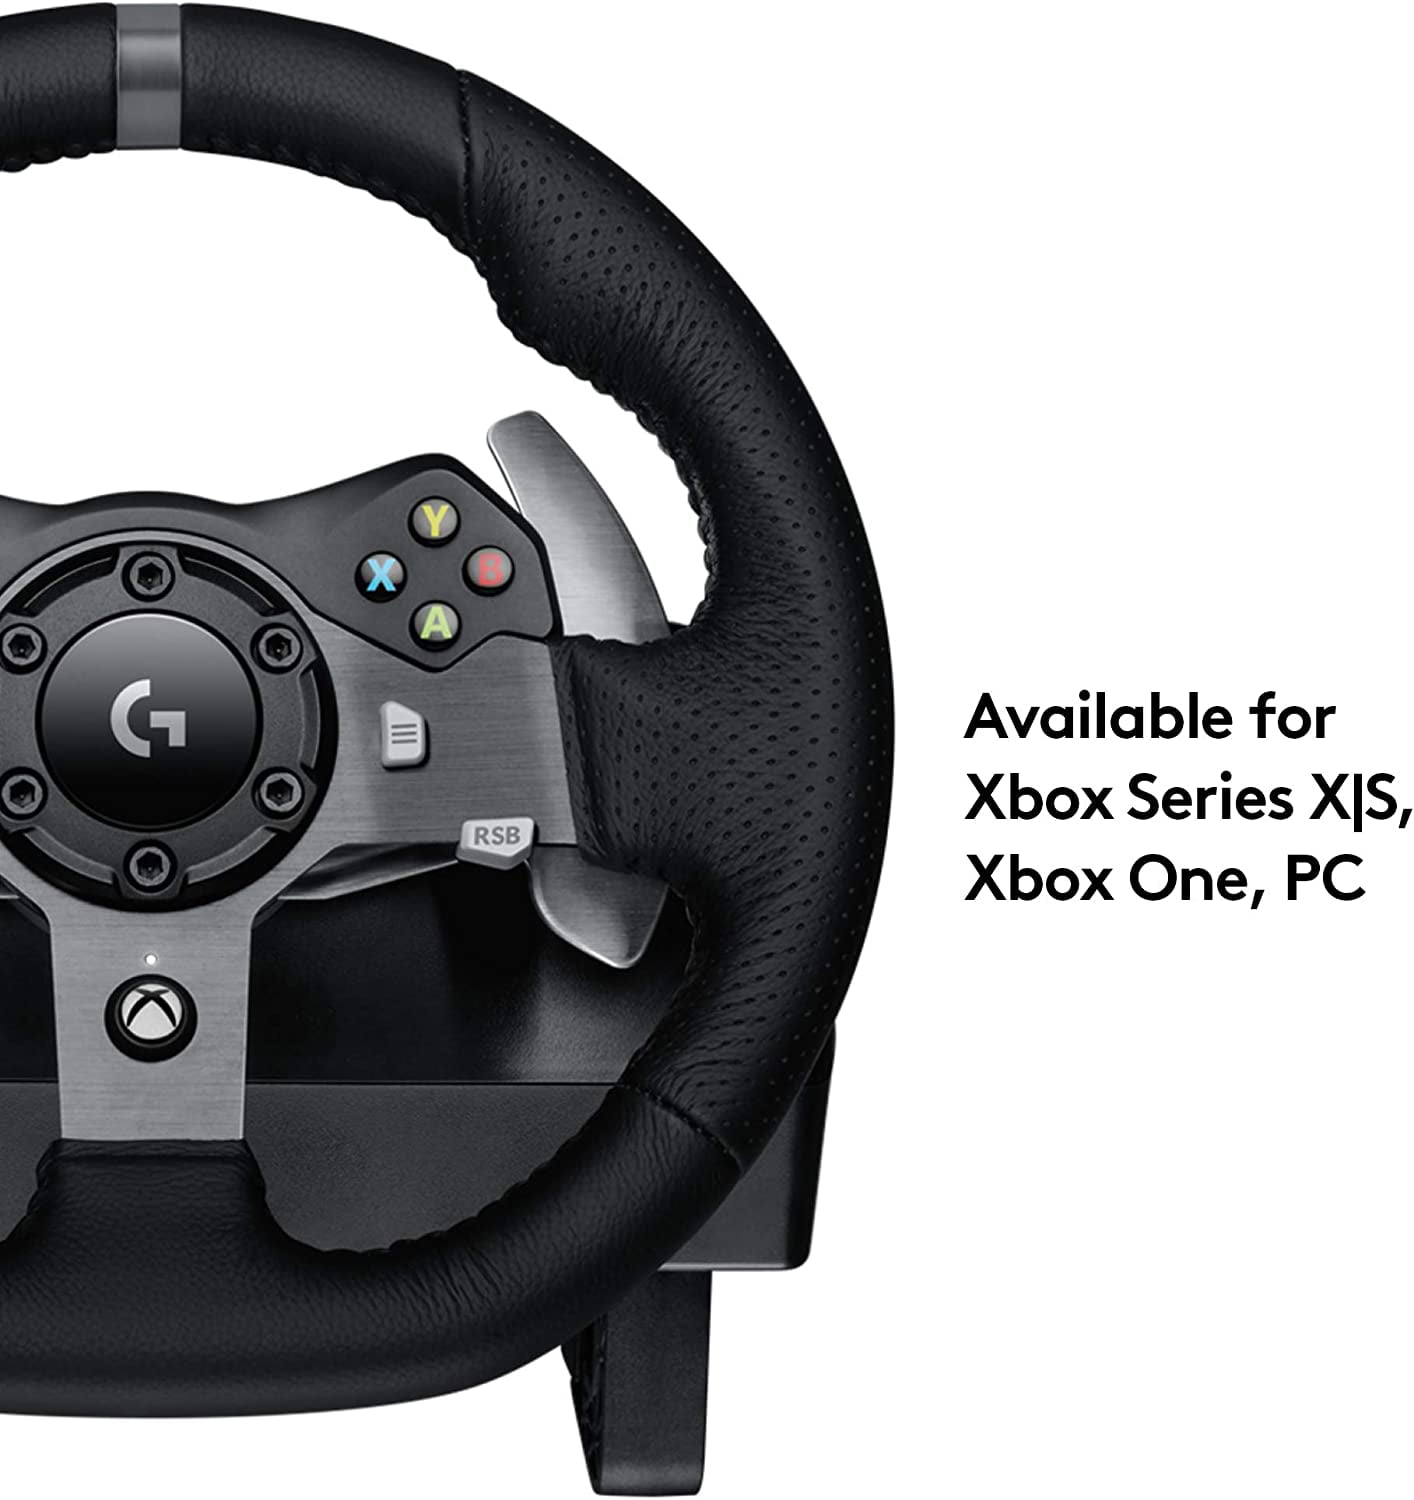 Logitech G920 Driving Force Racing Wheel and Floor Pedals, Real 